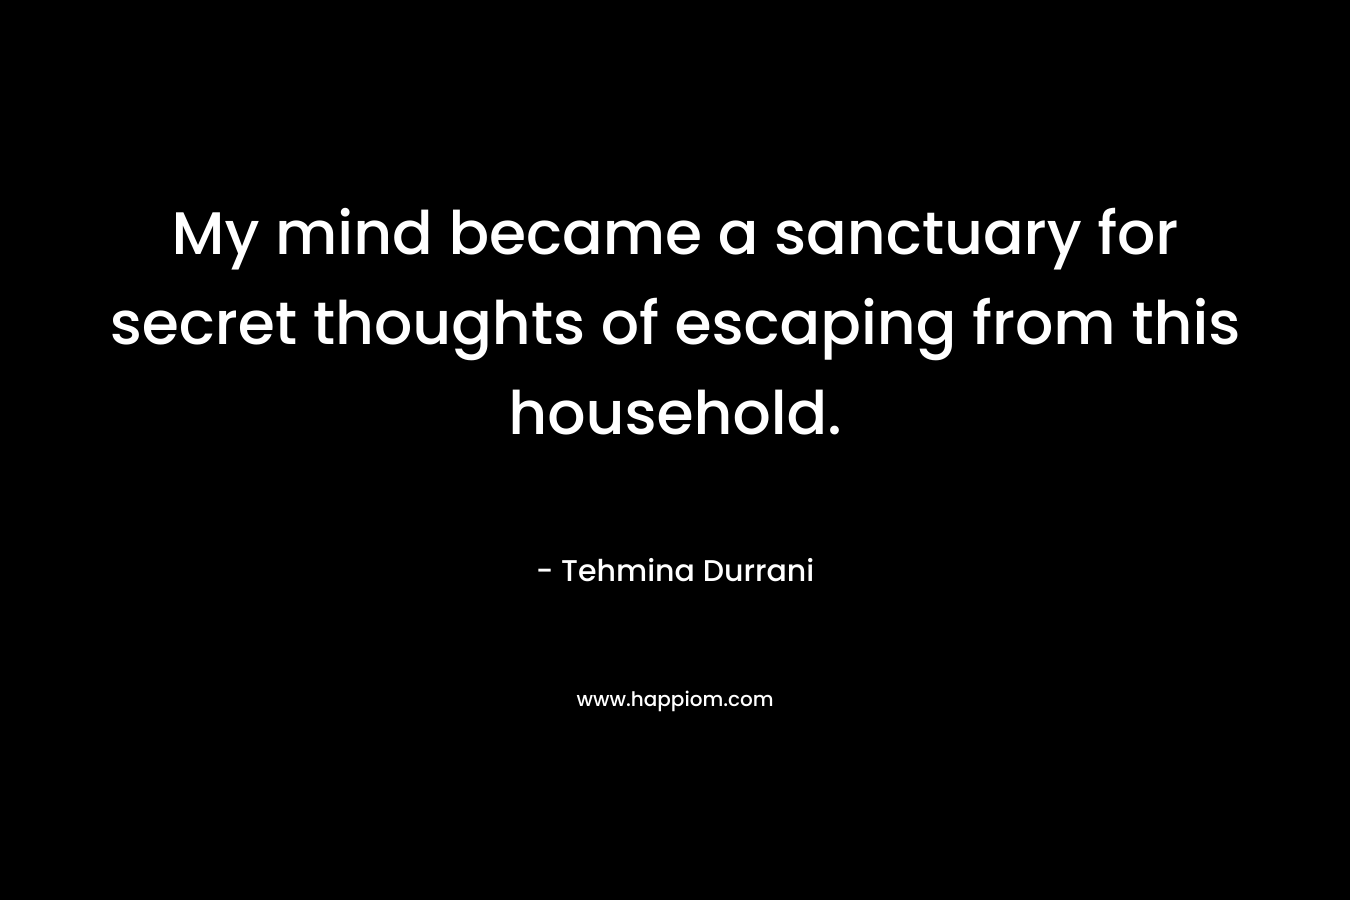 My mind became a sanctuary for secret thoughts of escaping from this household. – Tehmina Durrani